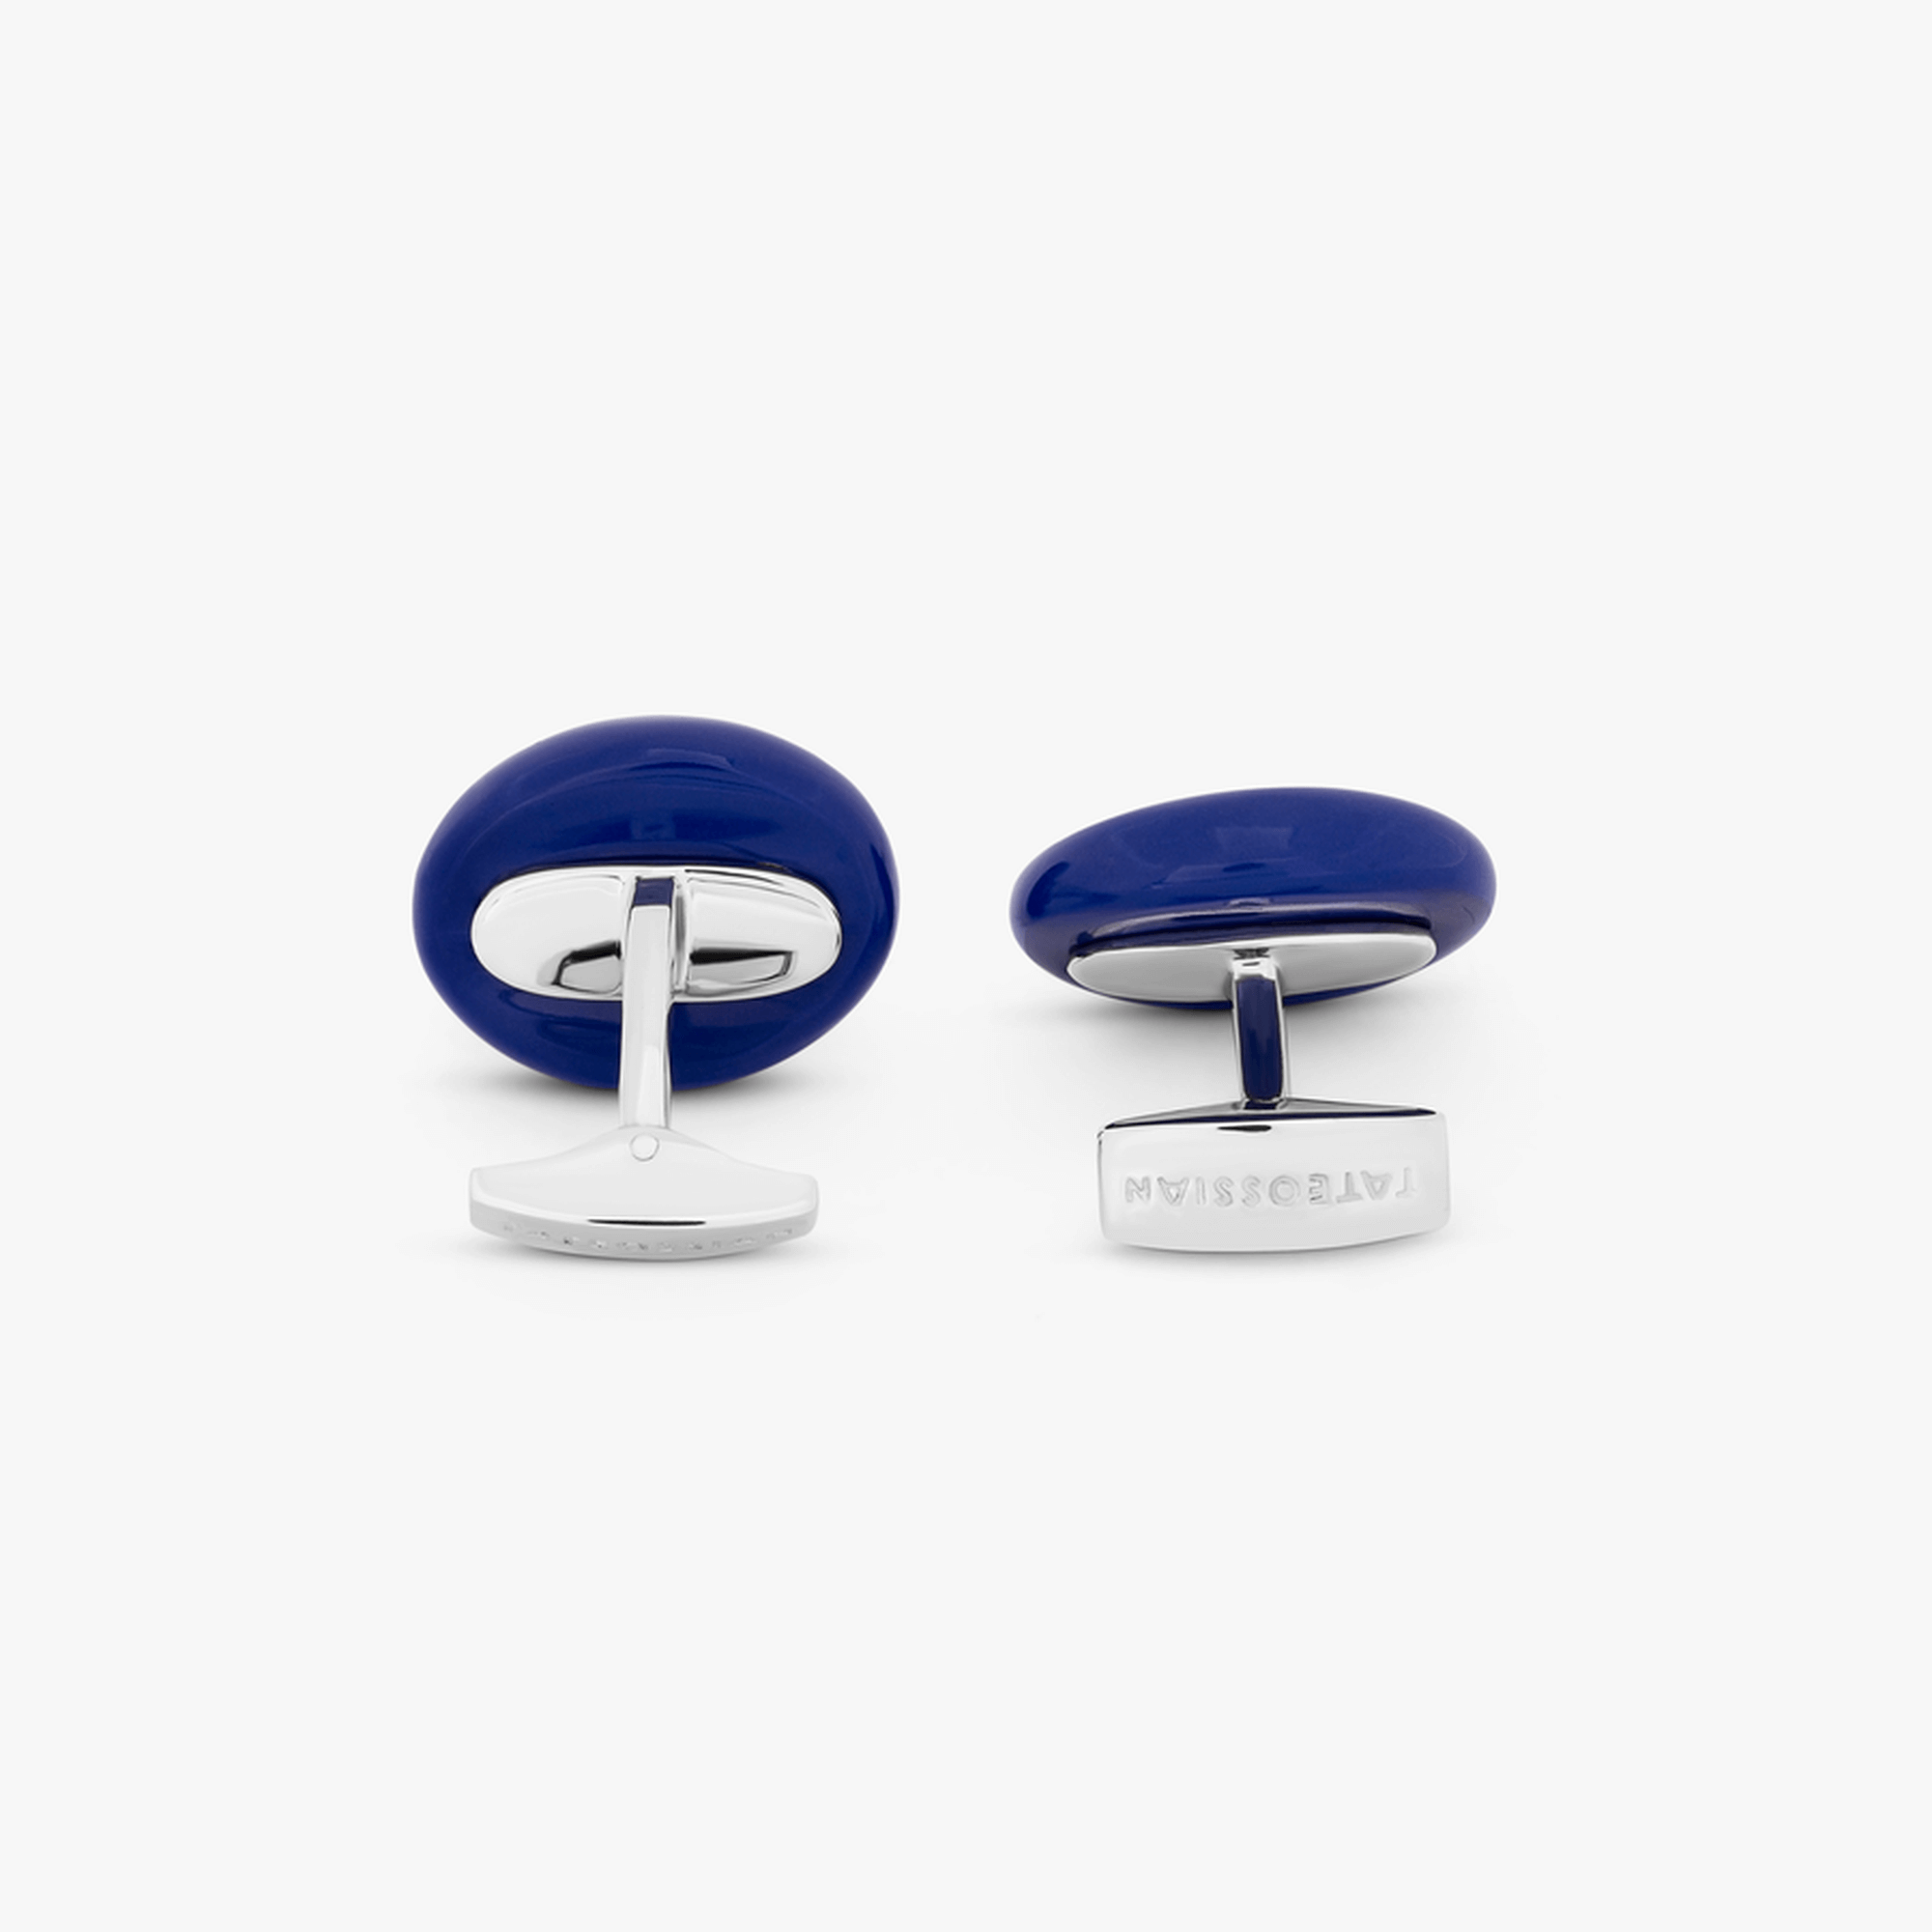 Cable Marine Link silver cufflinks with blue lapis CL5554-Cufflinks.com.sg